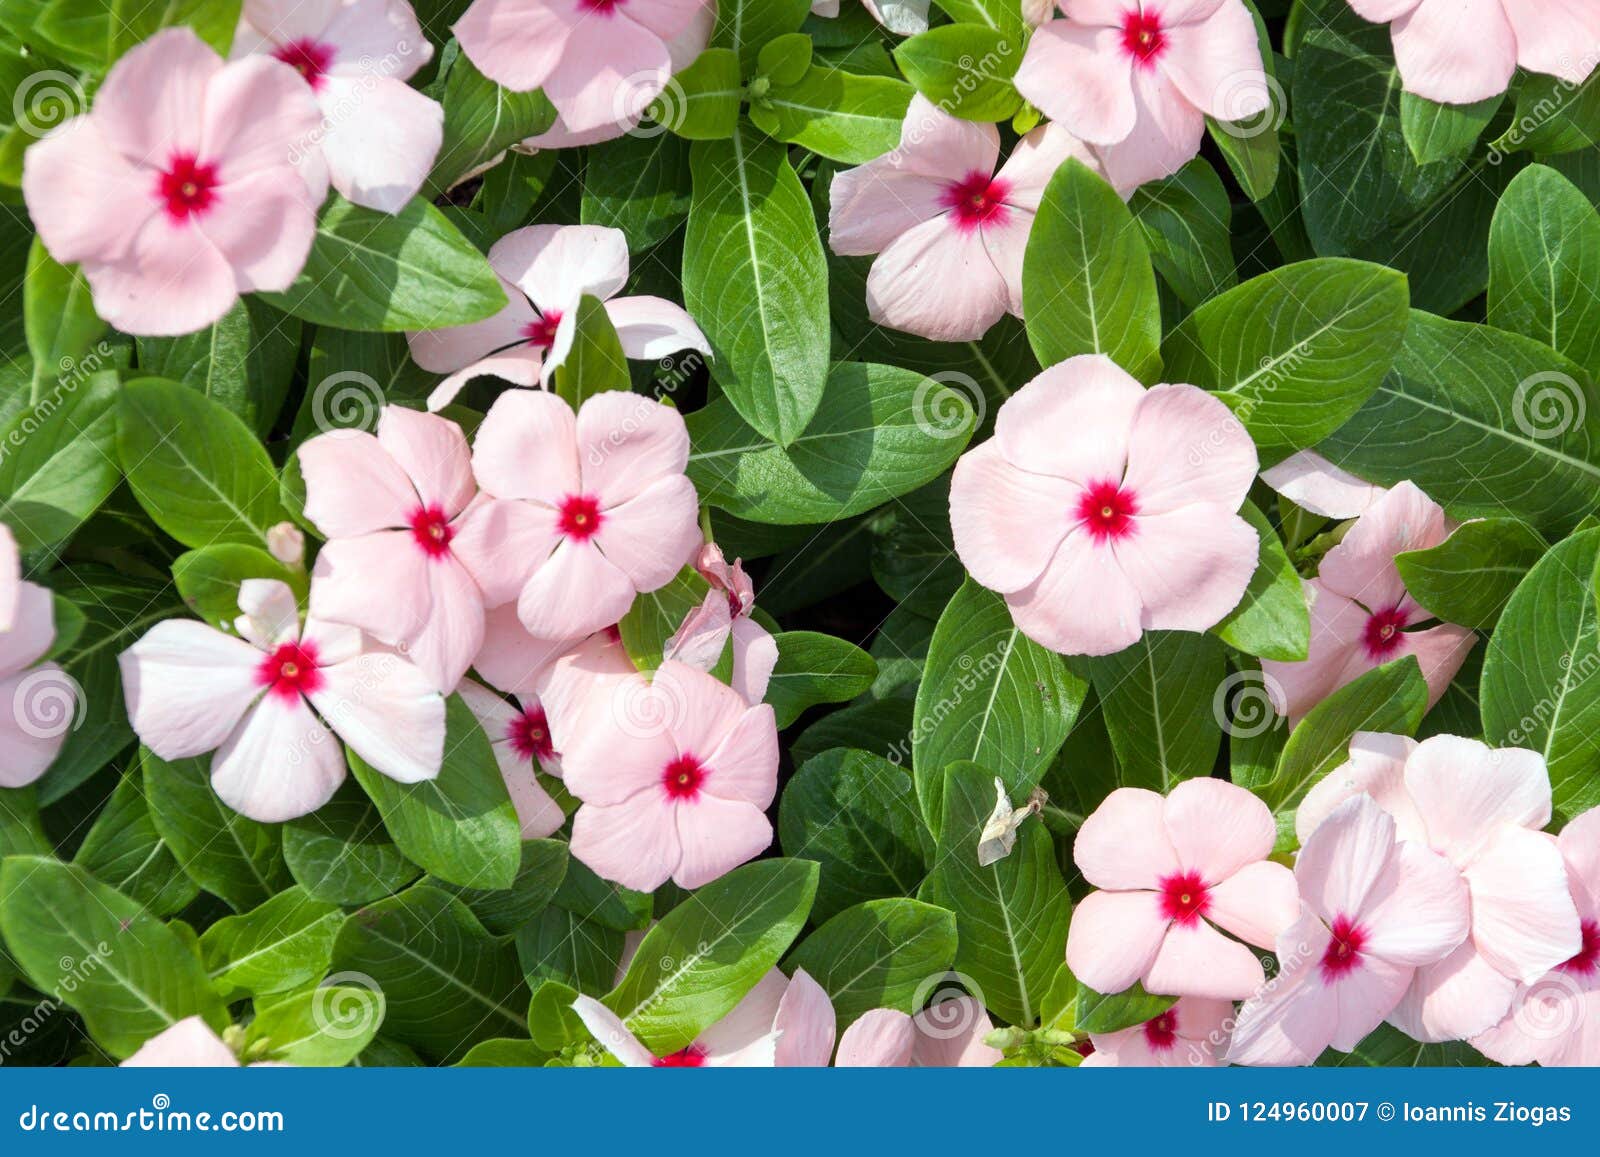 Pink Flowers with Green Leafs As Backround Stock Image - Image of ...